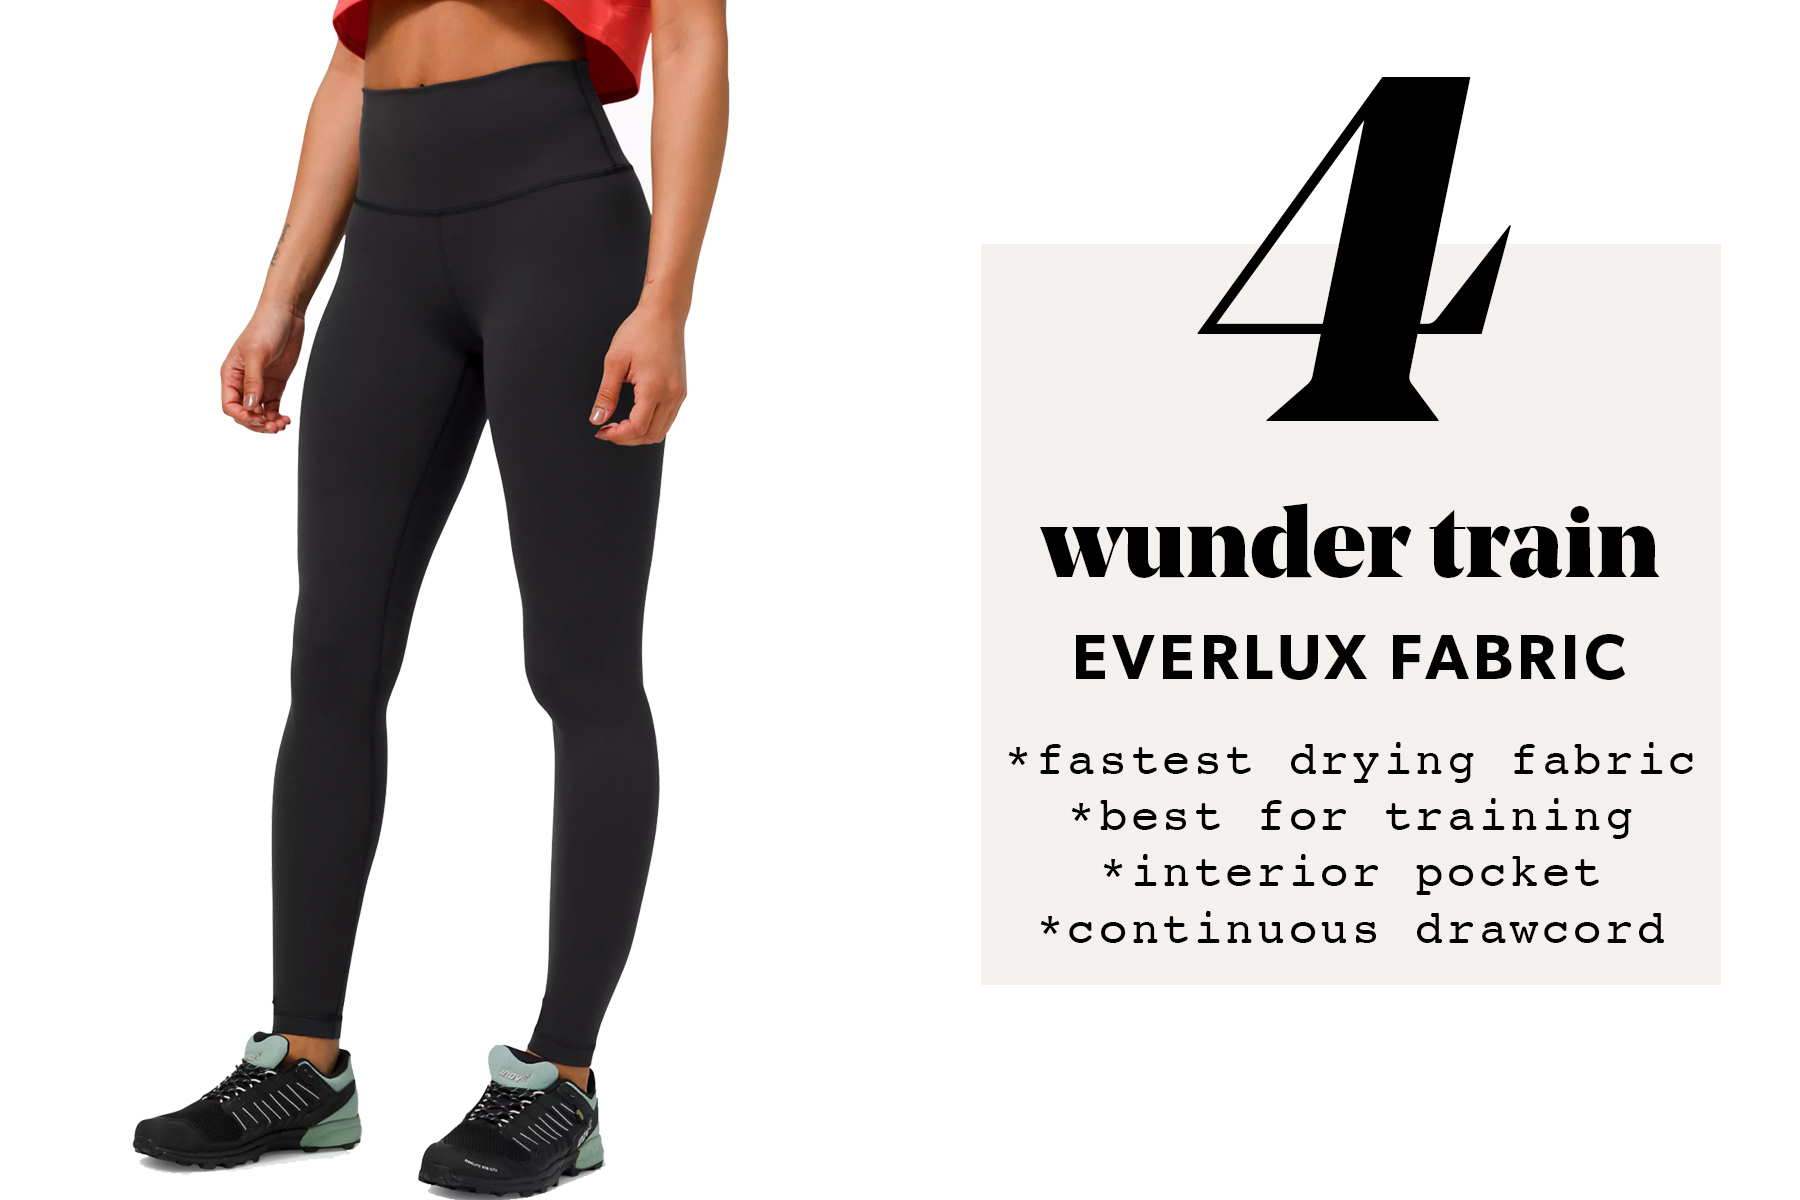 Lululemon Legging Fabric Guide: Everlux for Super Sweaty Workouts